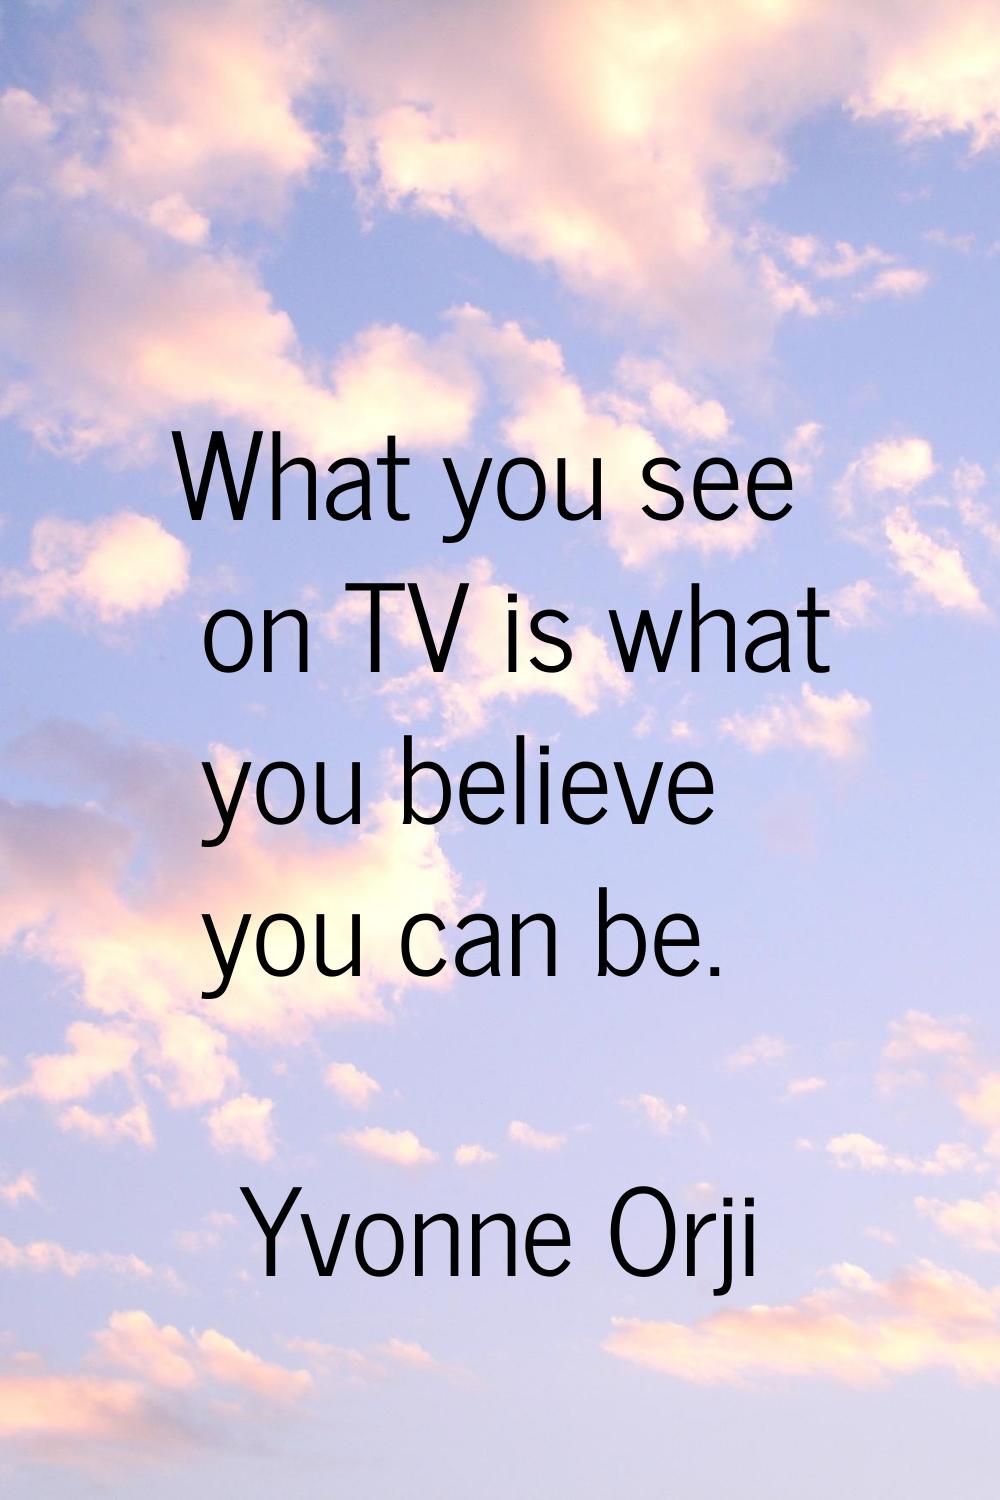 What you see on TV is what you believe you can be.